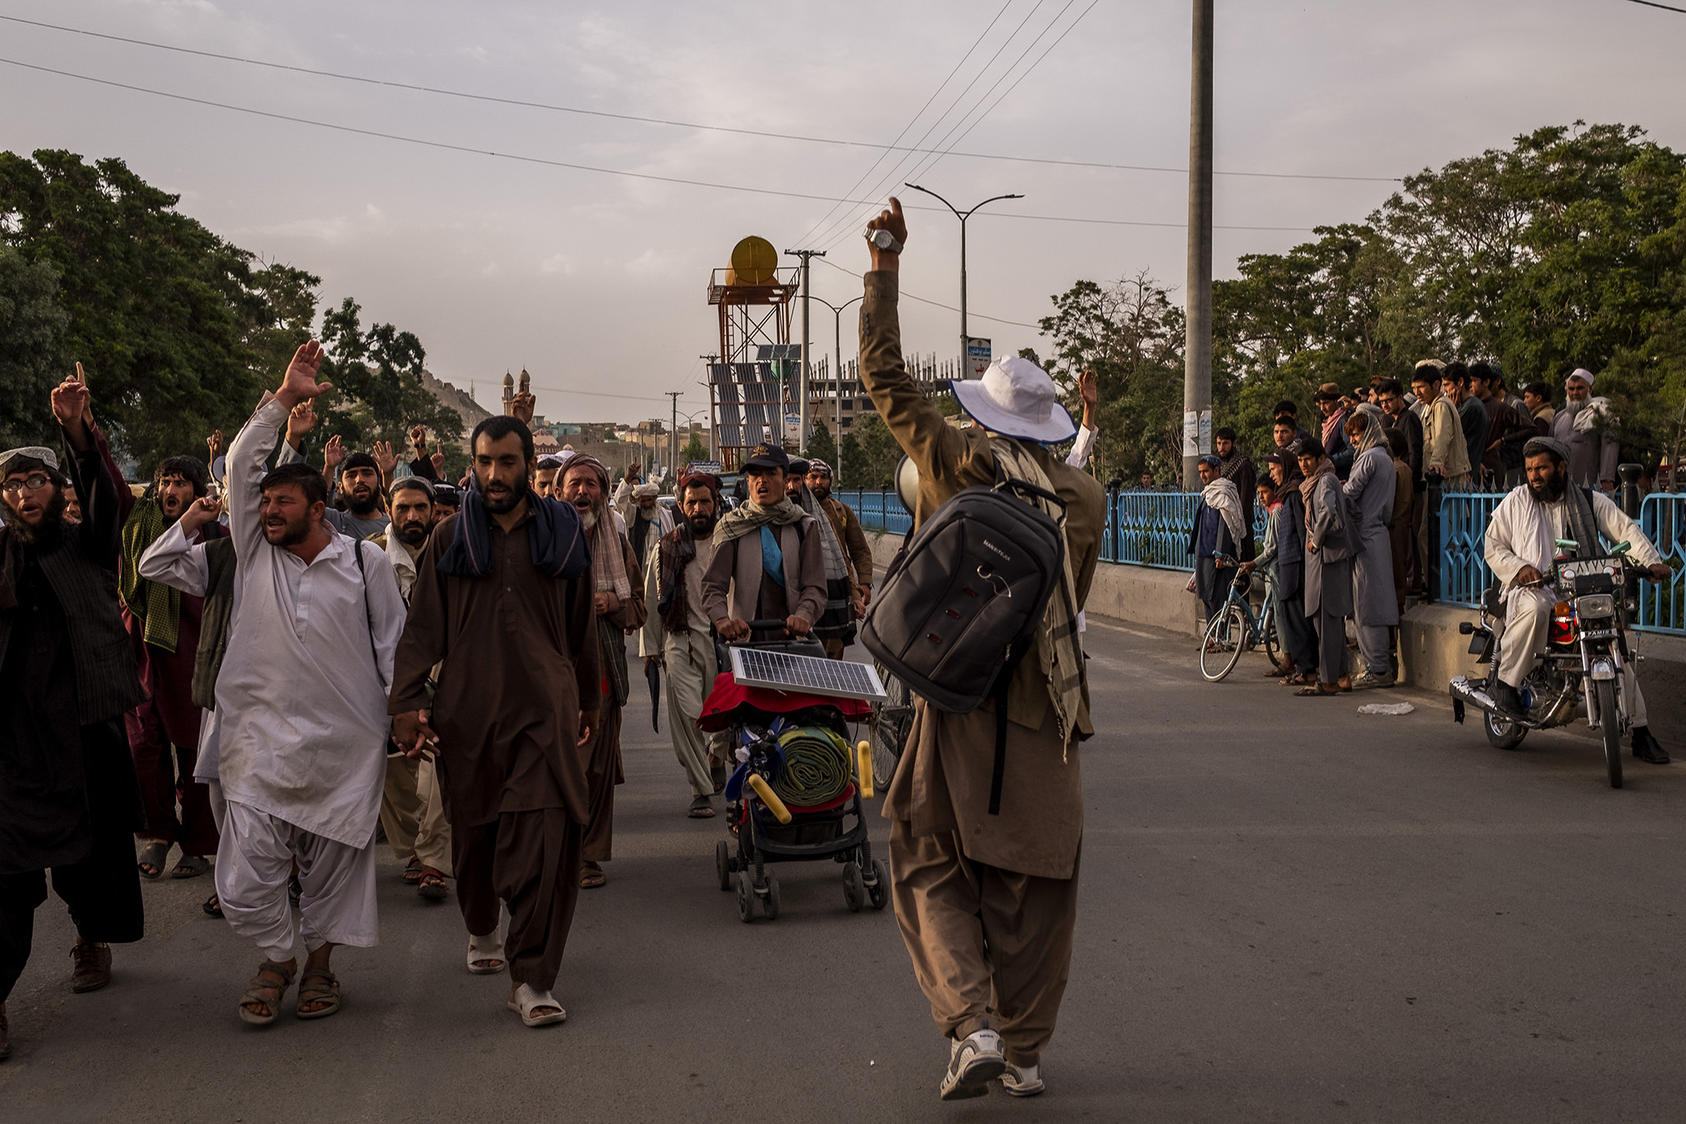 Members of a peace march walk through Ghazni, Afghanistan, June 10, 2018. Fed up with the relentless bloodshed, dozens of ordinary Afghans brave blistered feet and roadside bombs to carry a message of peace. (Jim Huylebroek/The New York Times)